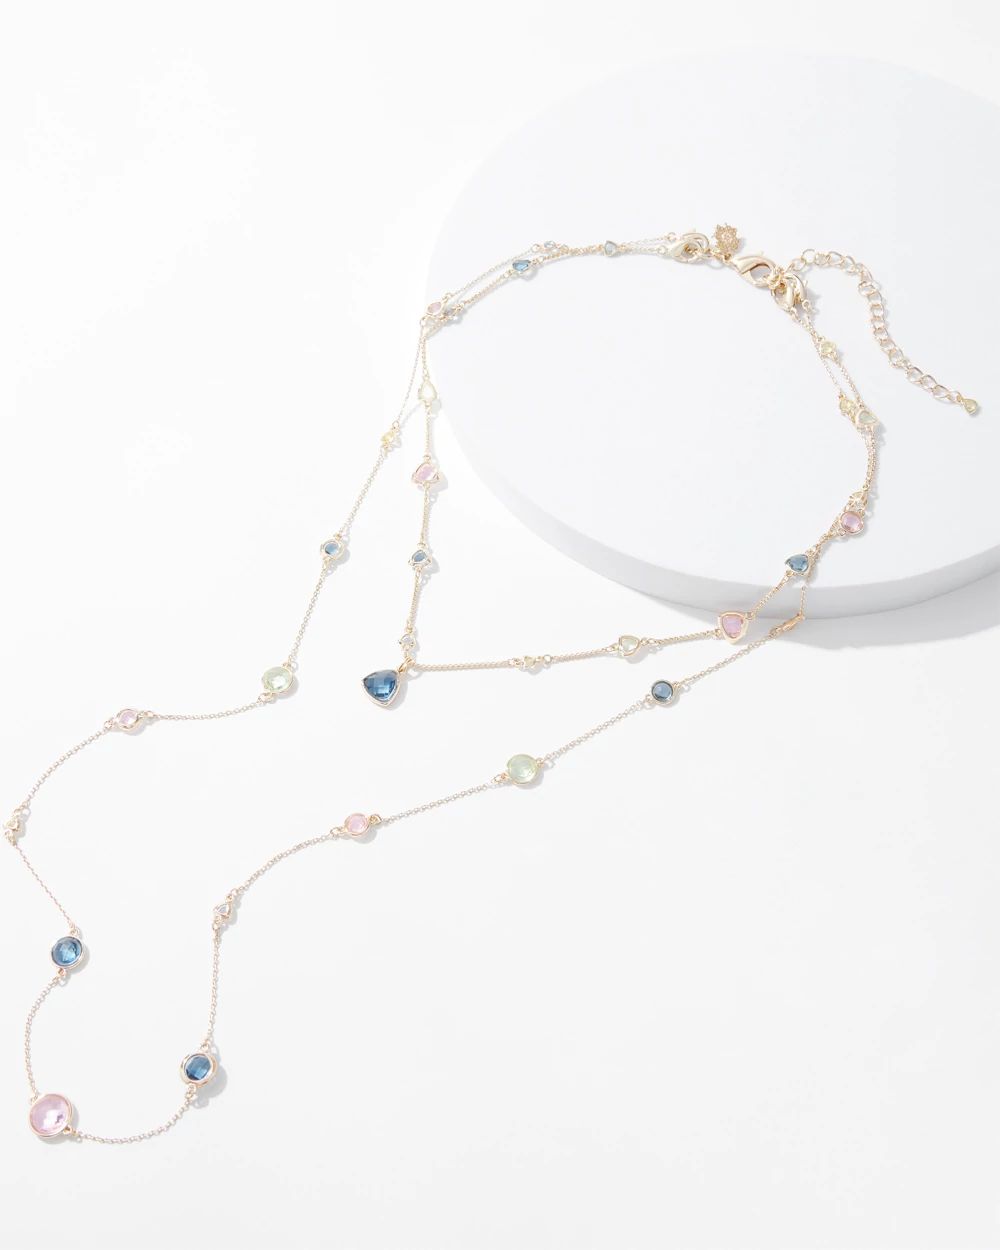 Gold Convertible Multi-Crystal Multi-Strand Necklace